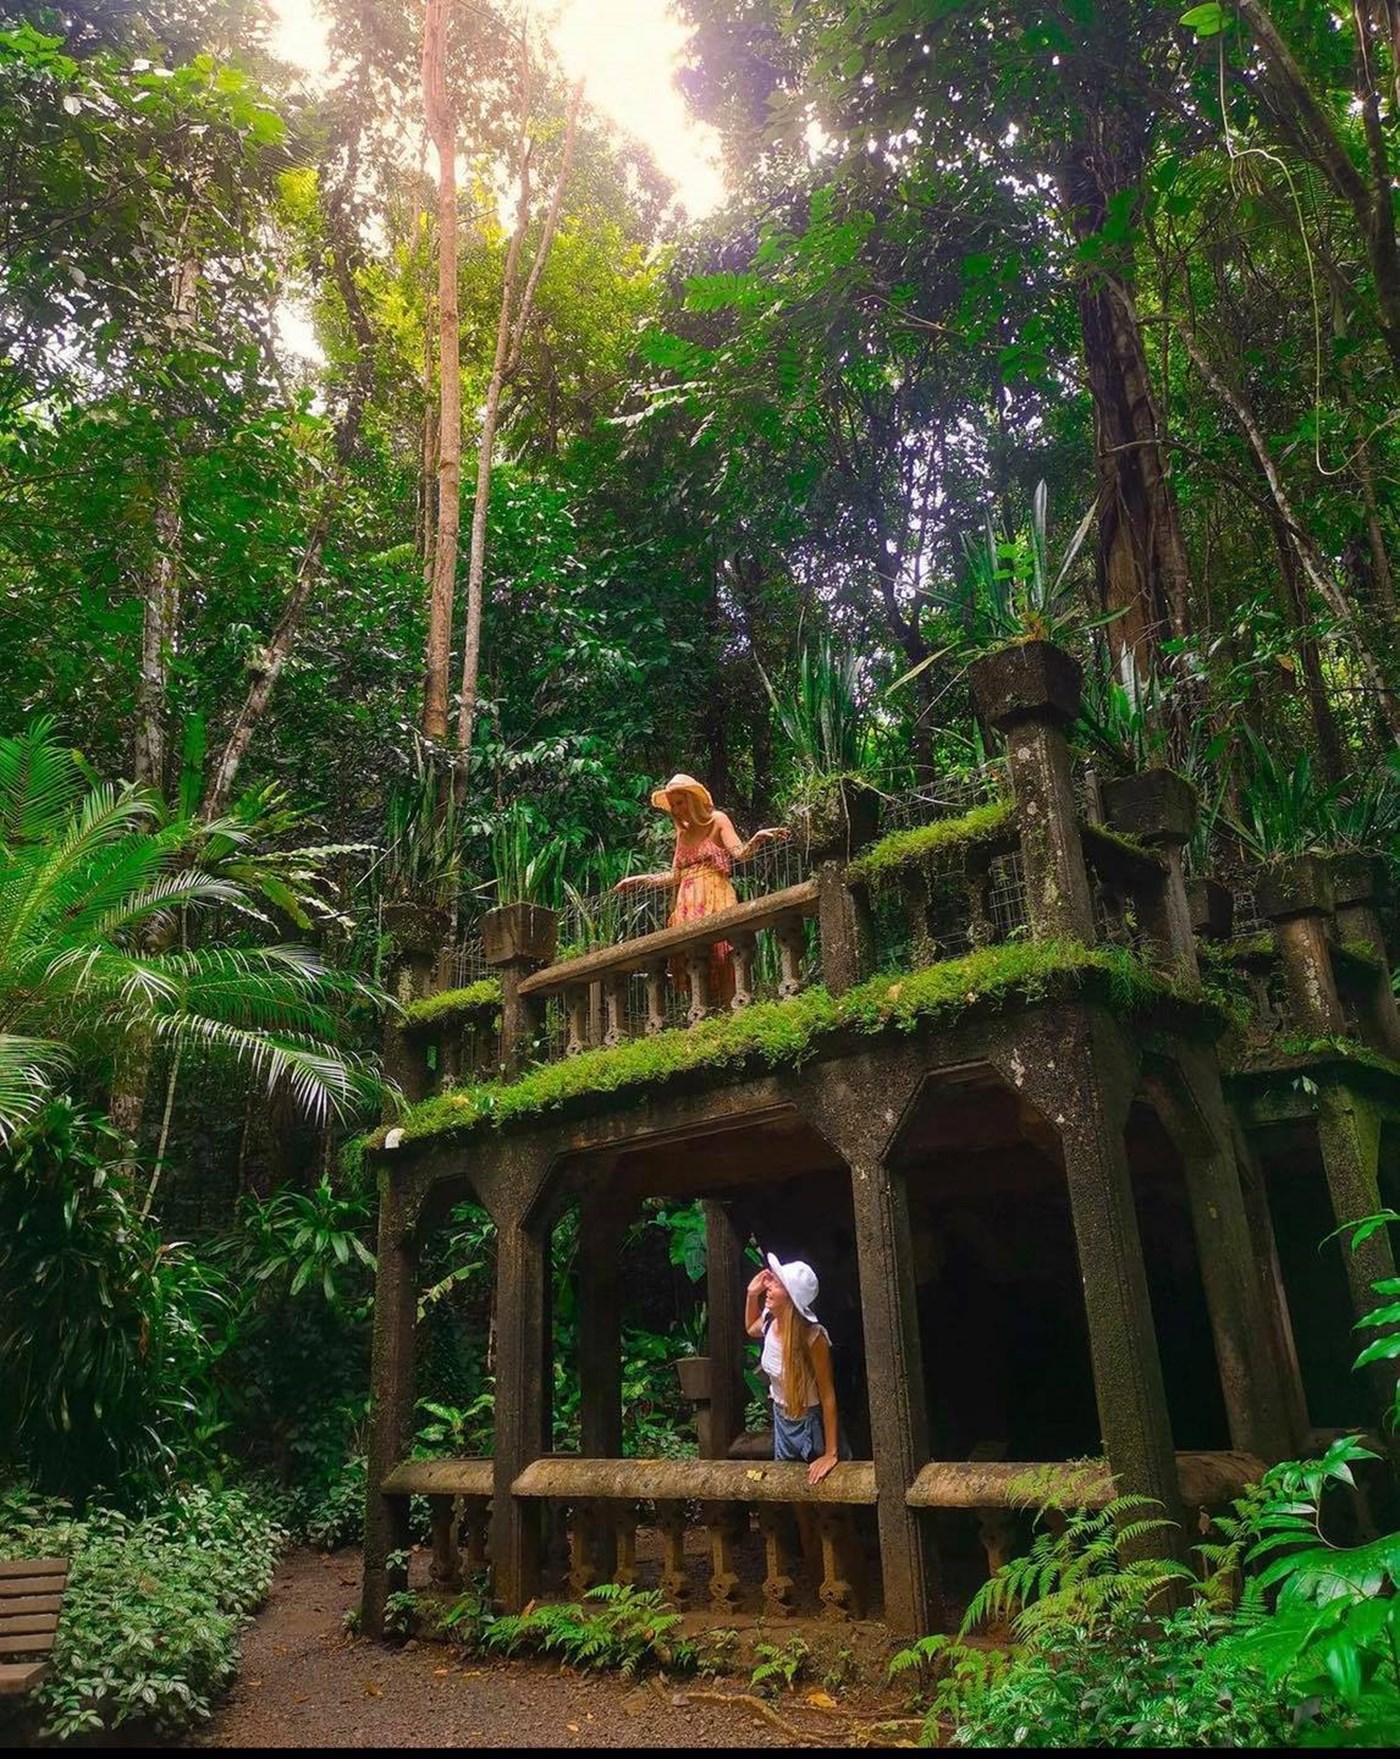 An old ruined stone building in a rainforest, one person is on the top balcony level and another person is looking up at them